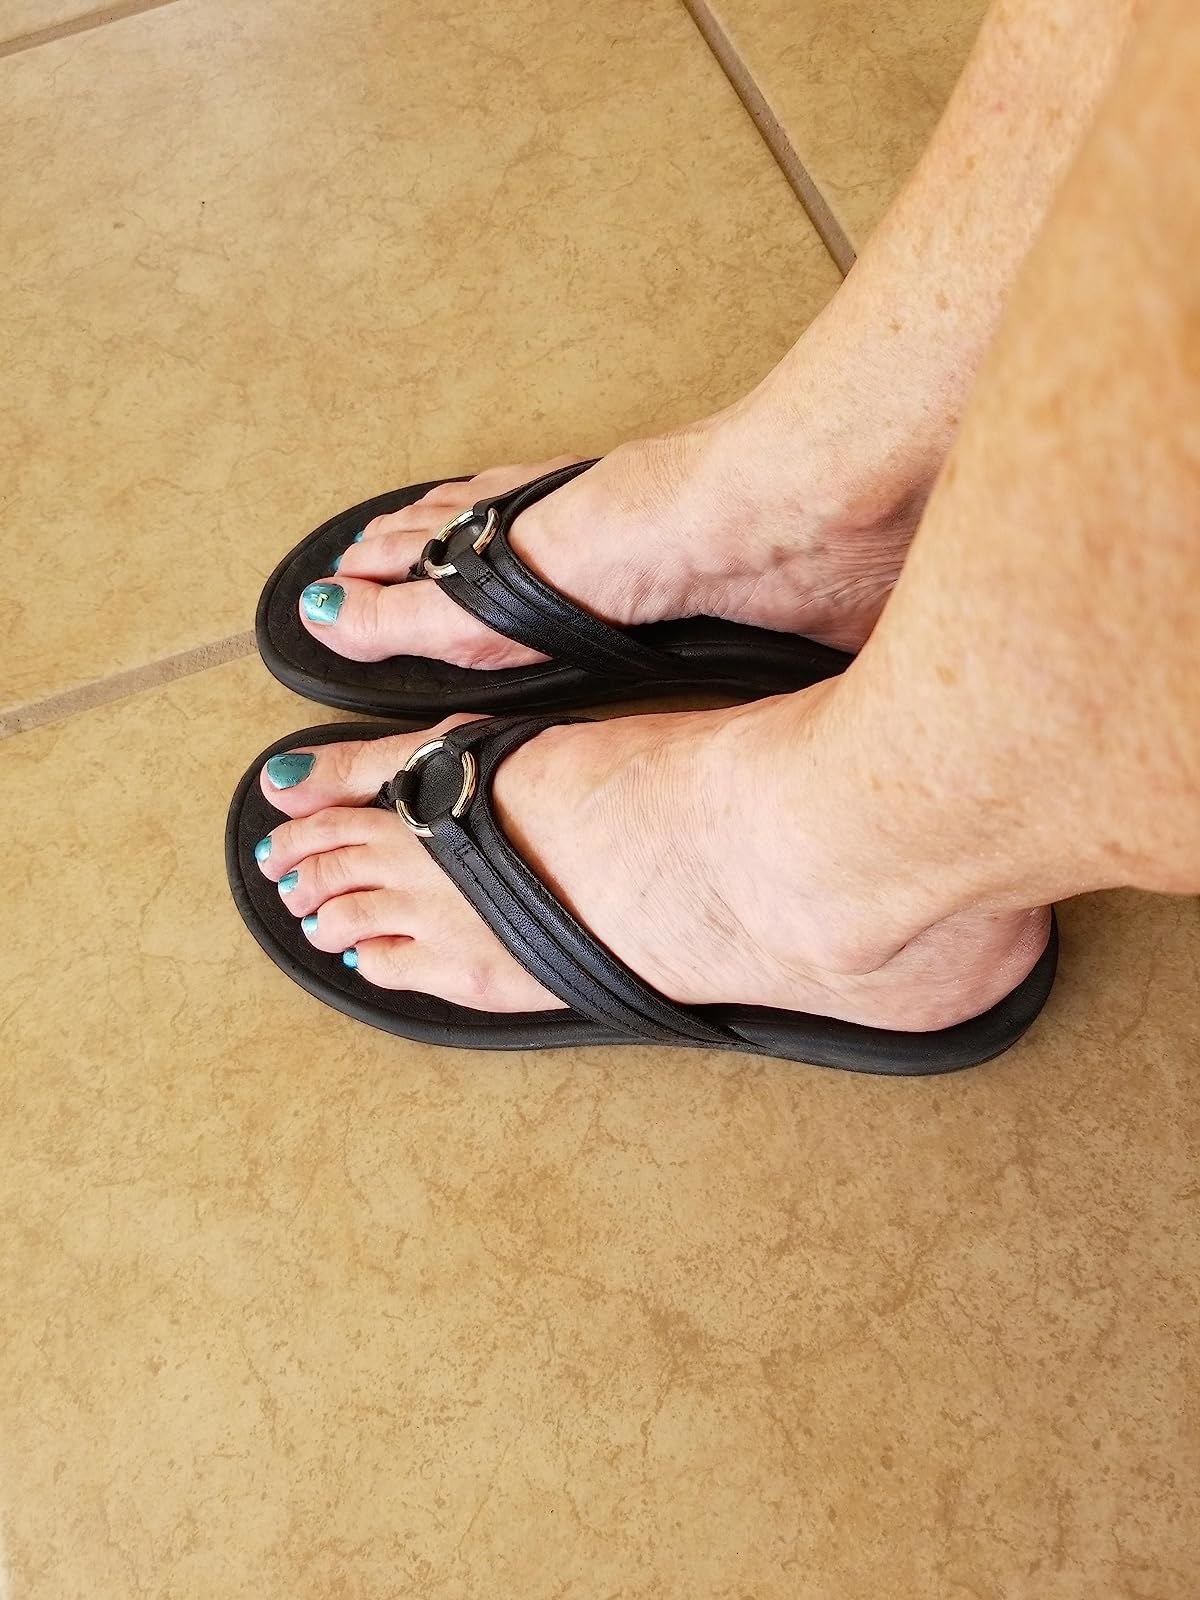 A reviewer wearing black sandals